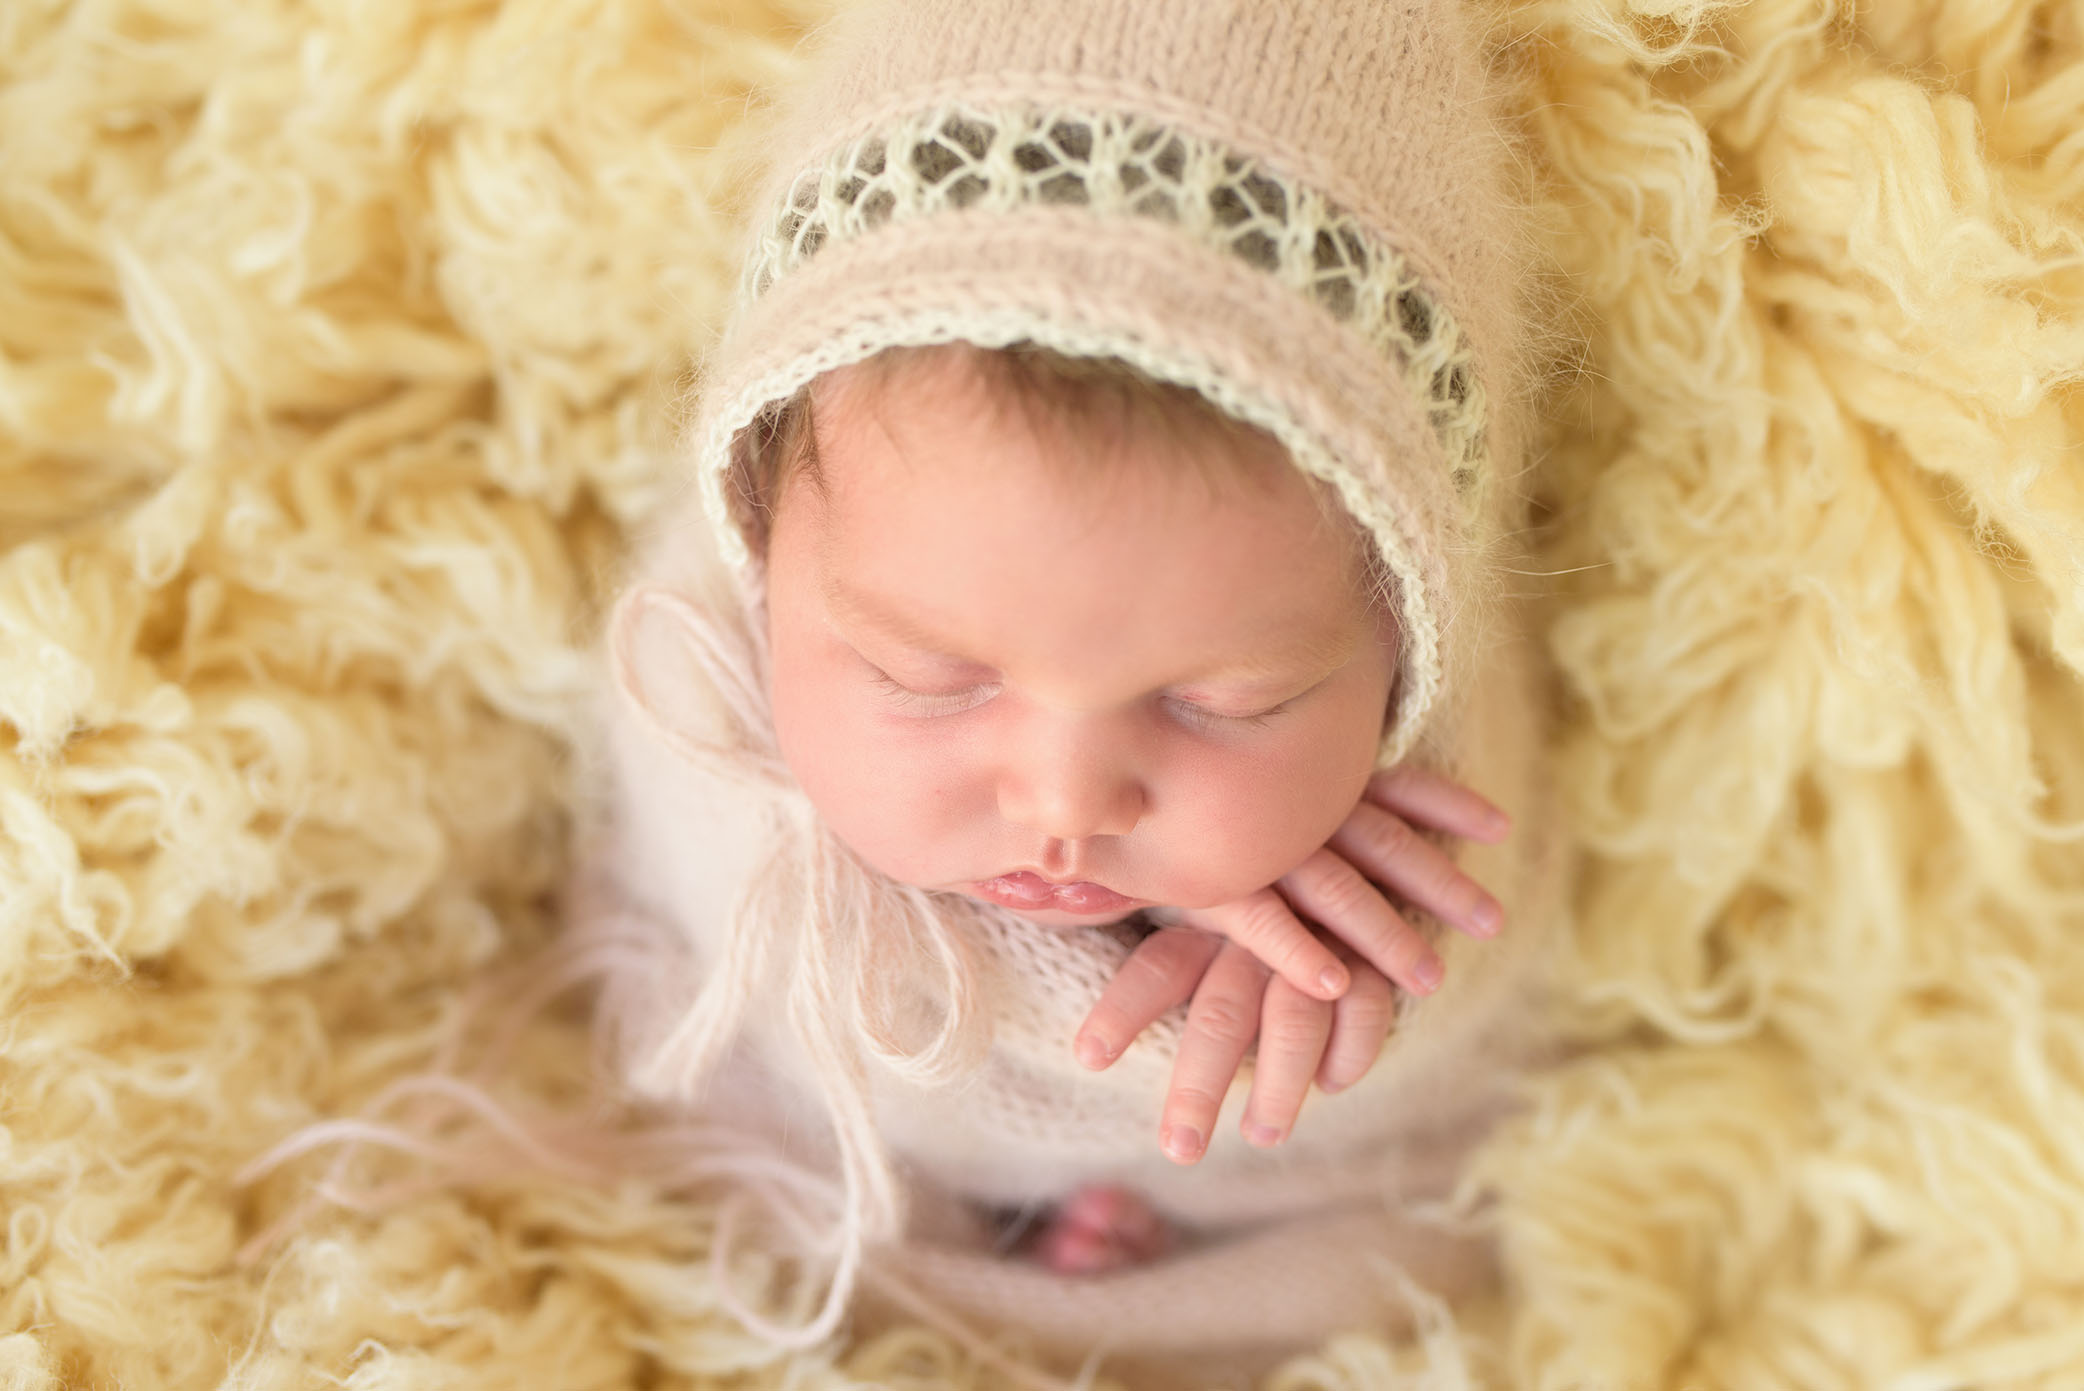 Newborn baby wrapped and posed on flokati